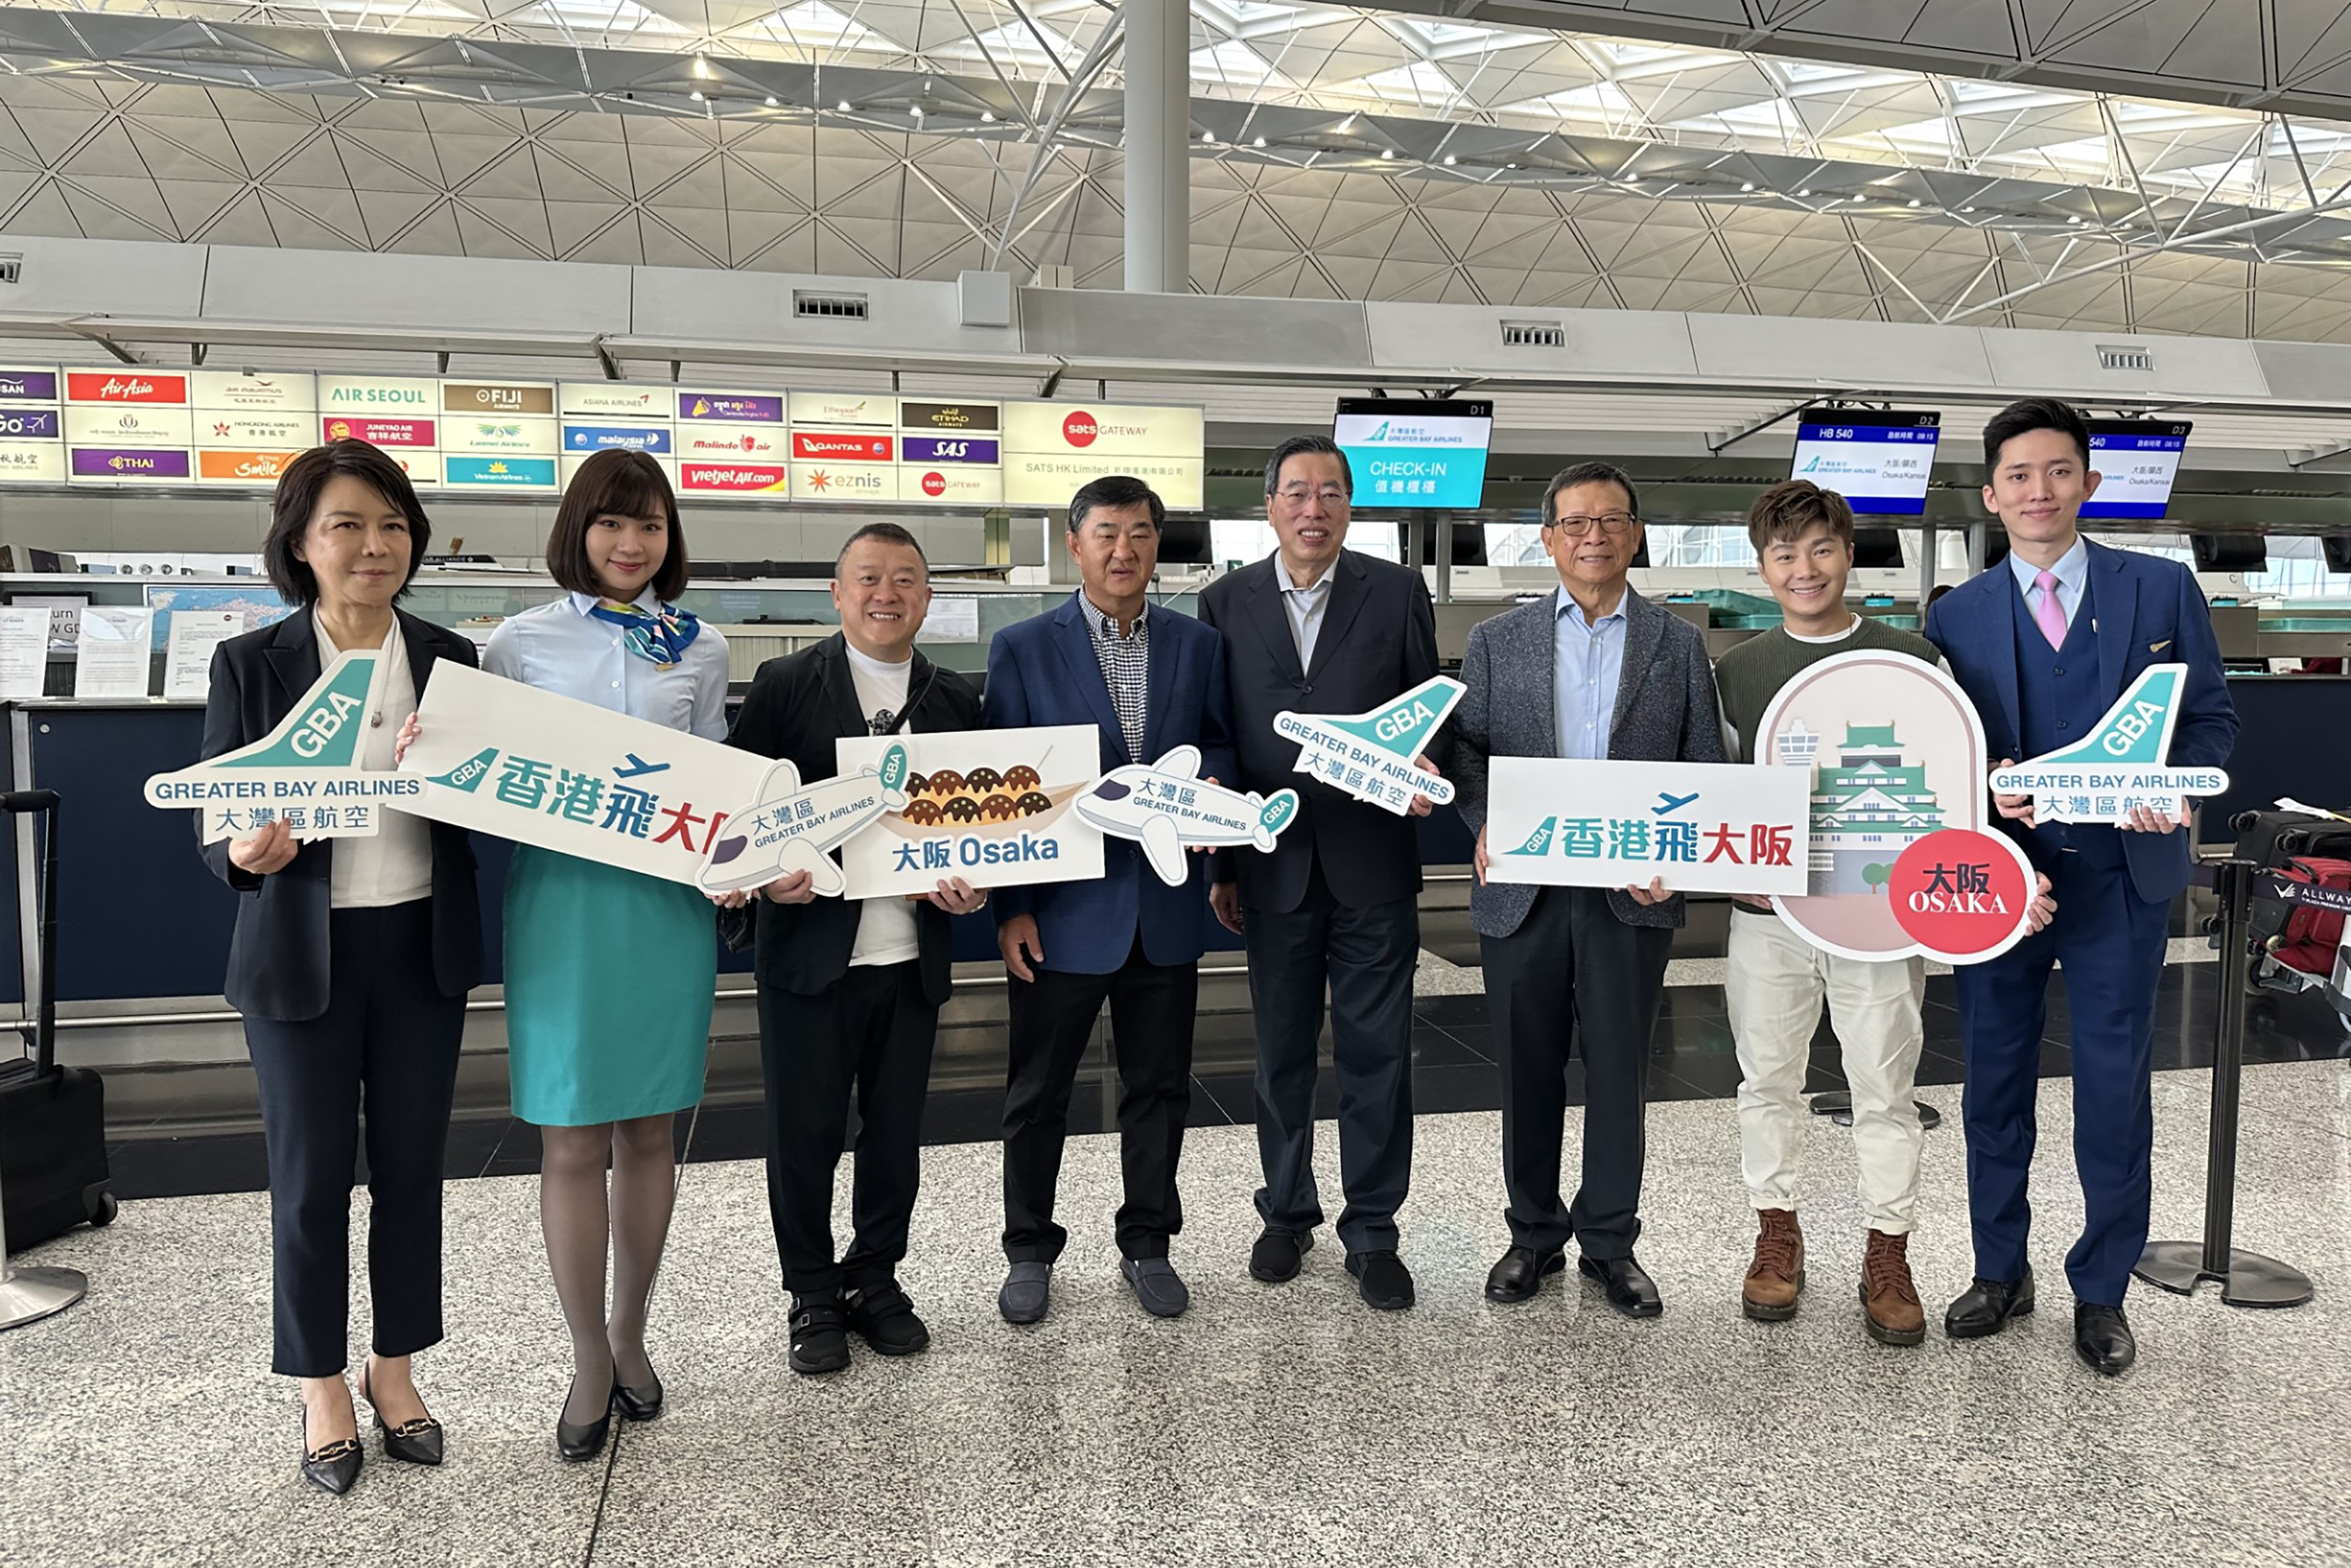 Greater Bay Airlines management joins inaugural flight to Osaka